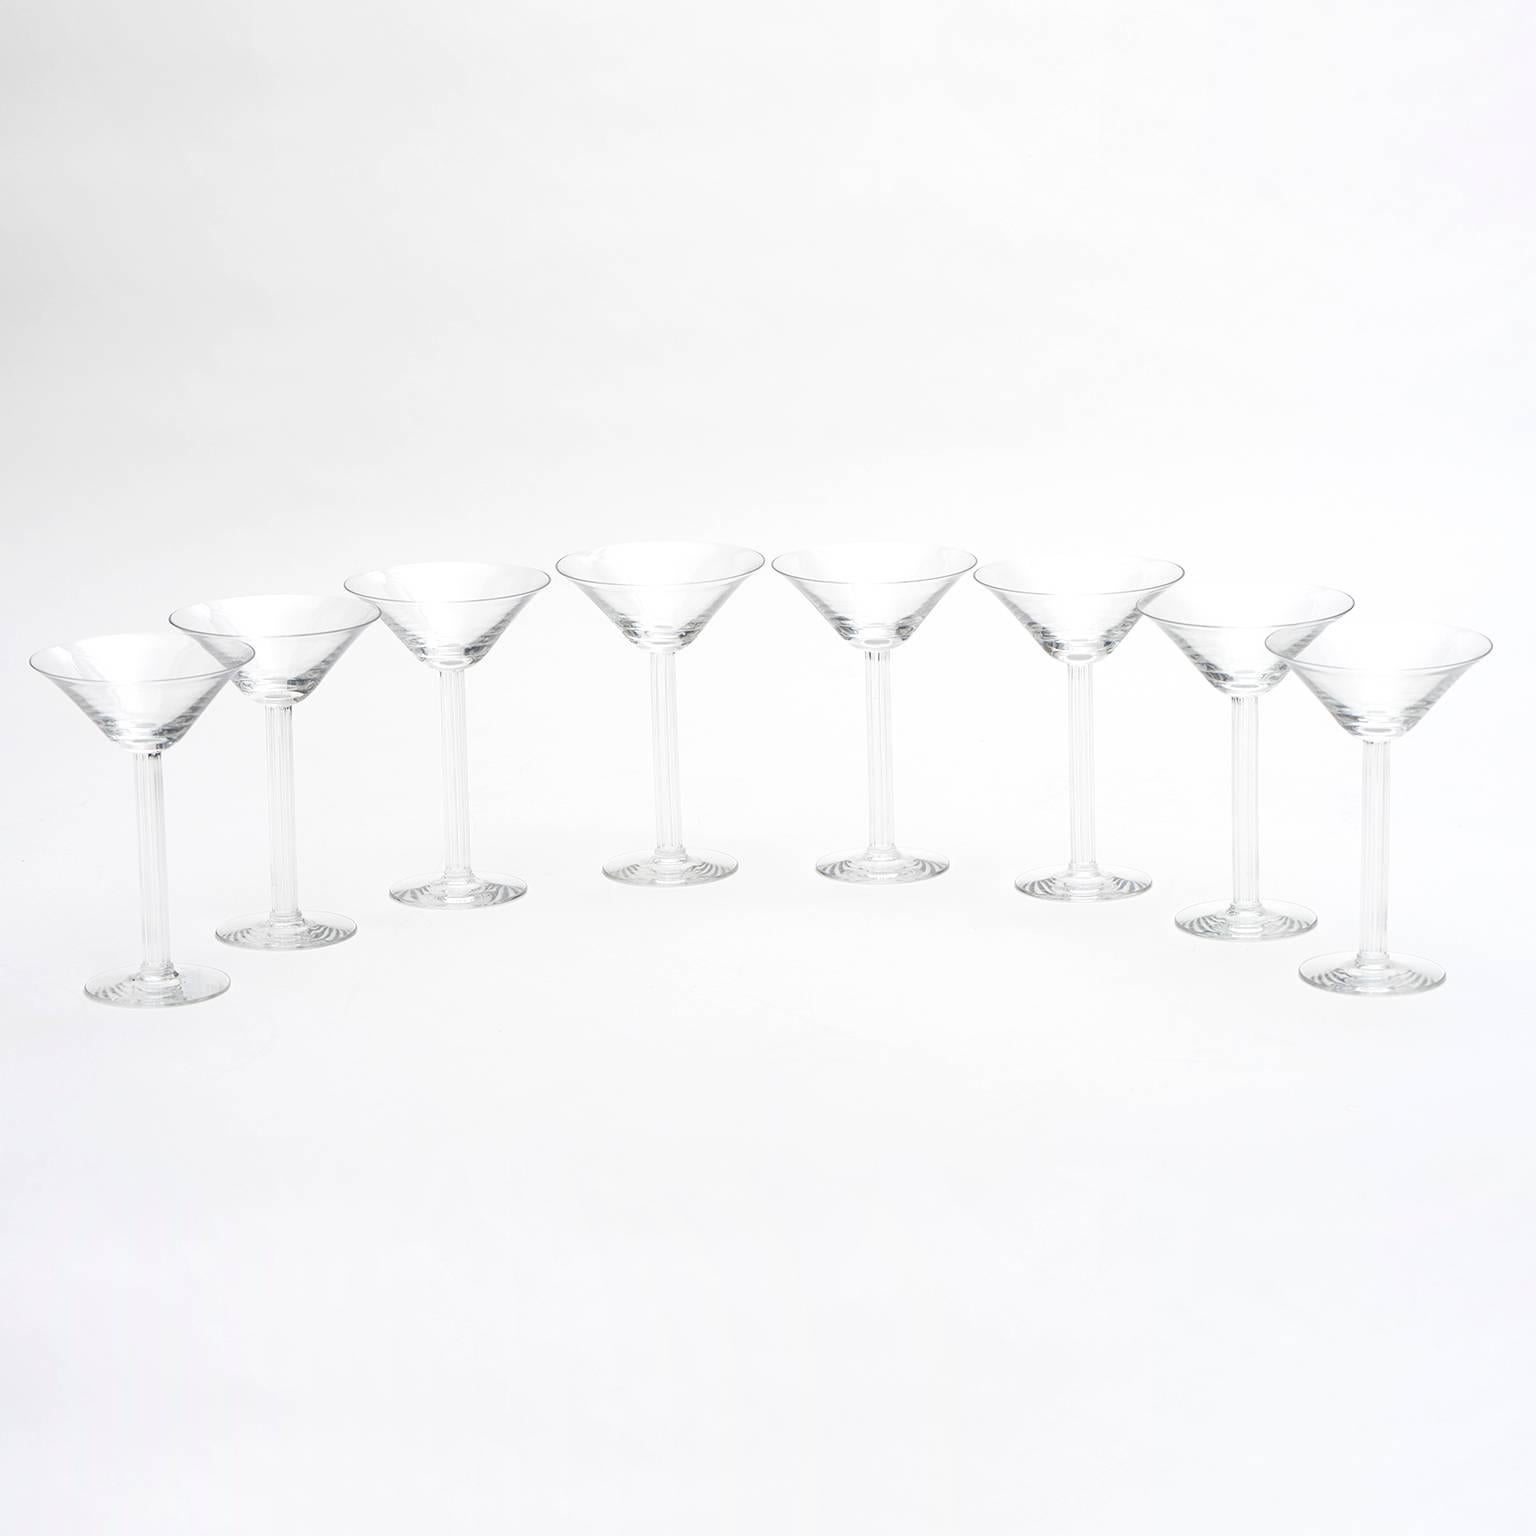 Martini glasses by Libbey, Toledo, Ohio, circa 1930s. The fabulous Art Deco Monticello pattern, designed by Edwin W. Fuerst is simply brilliant in its Martini glass iteration. The look is perfect for an amazing bar or used in a chic